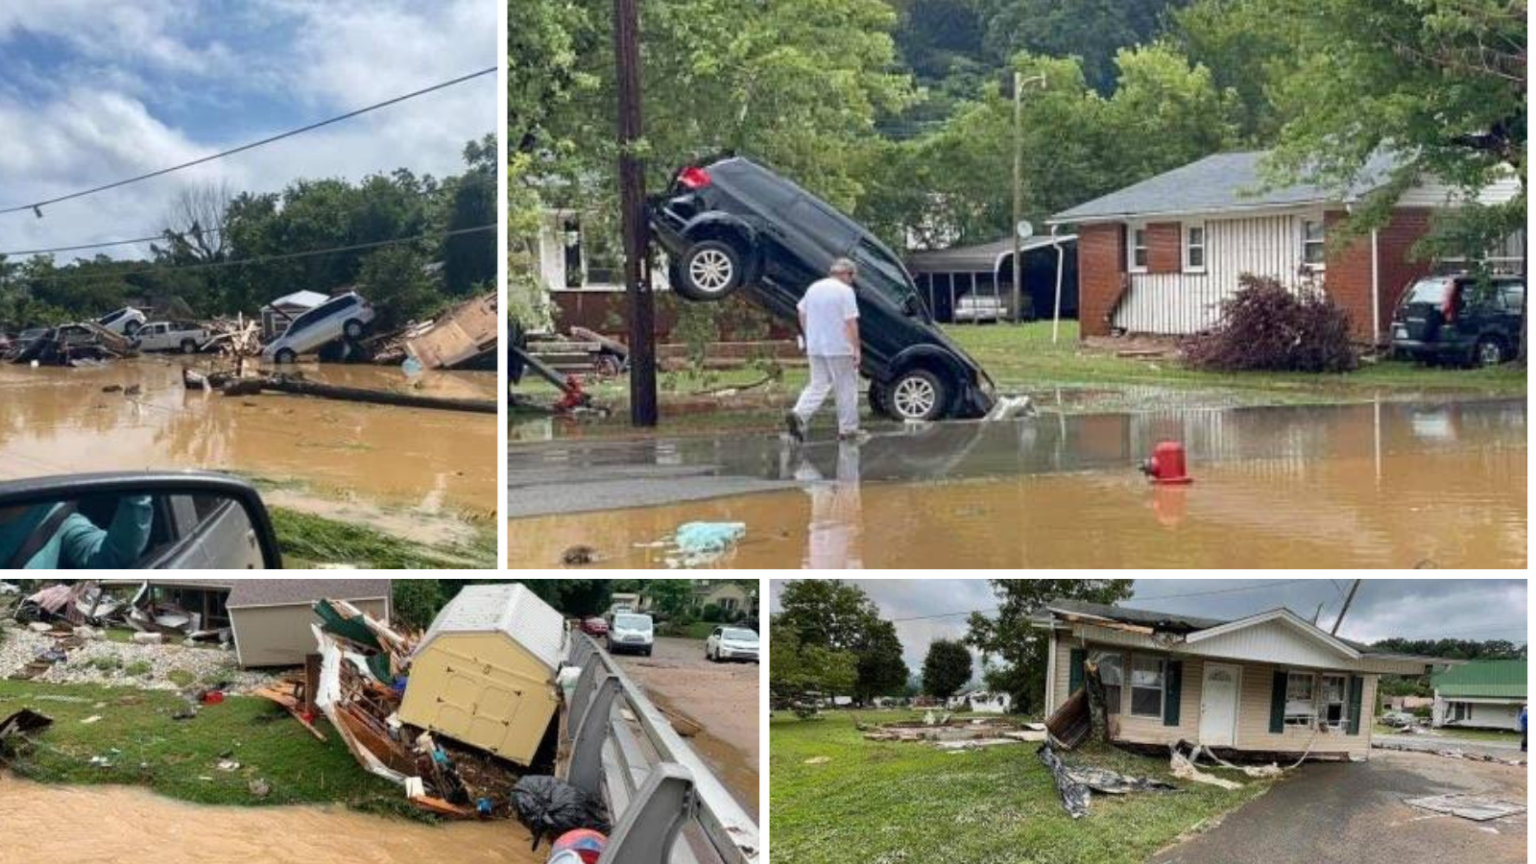 Search continues for victims of deadly Tennessee flooding, recovery